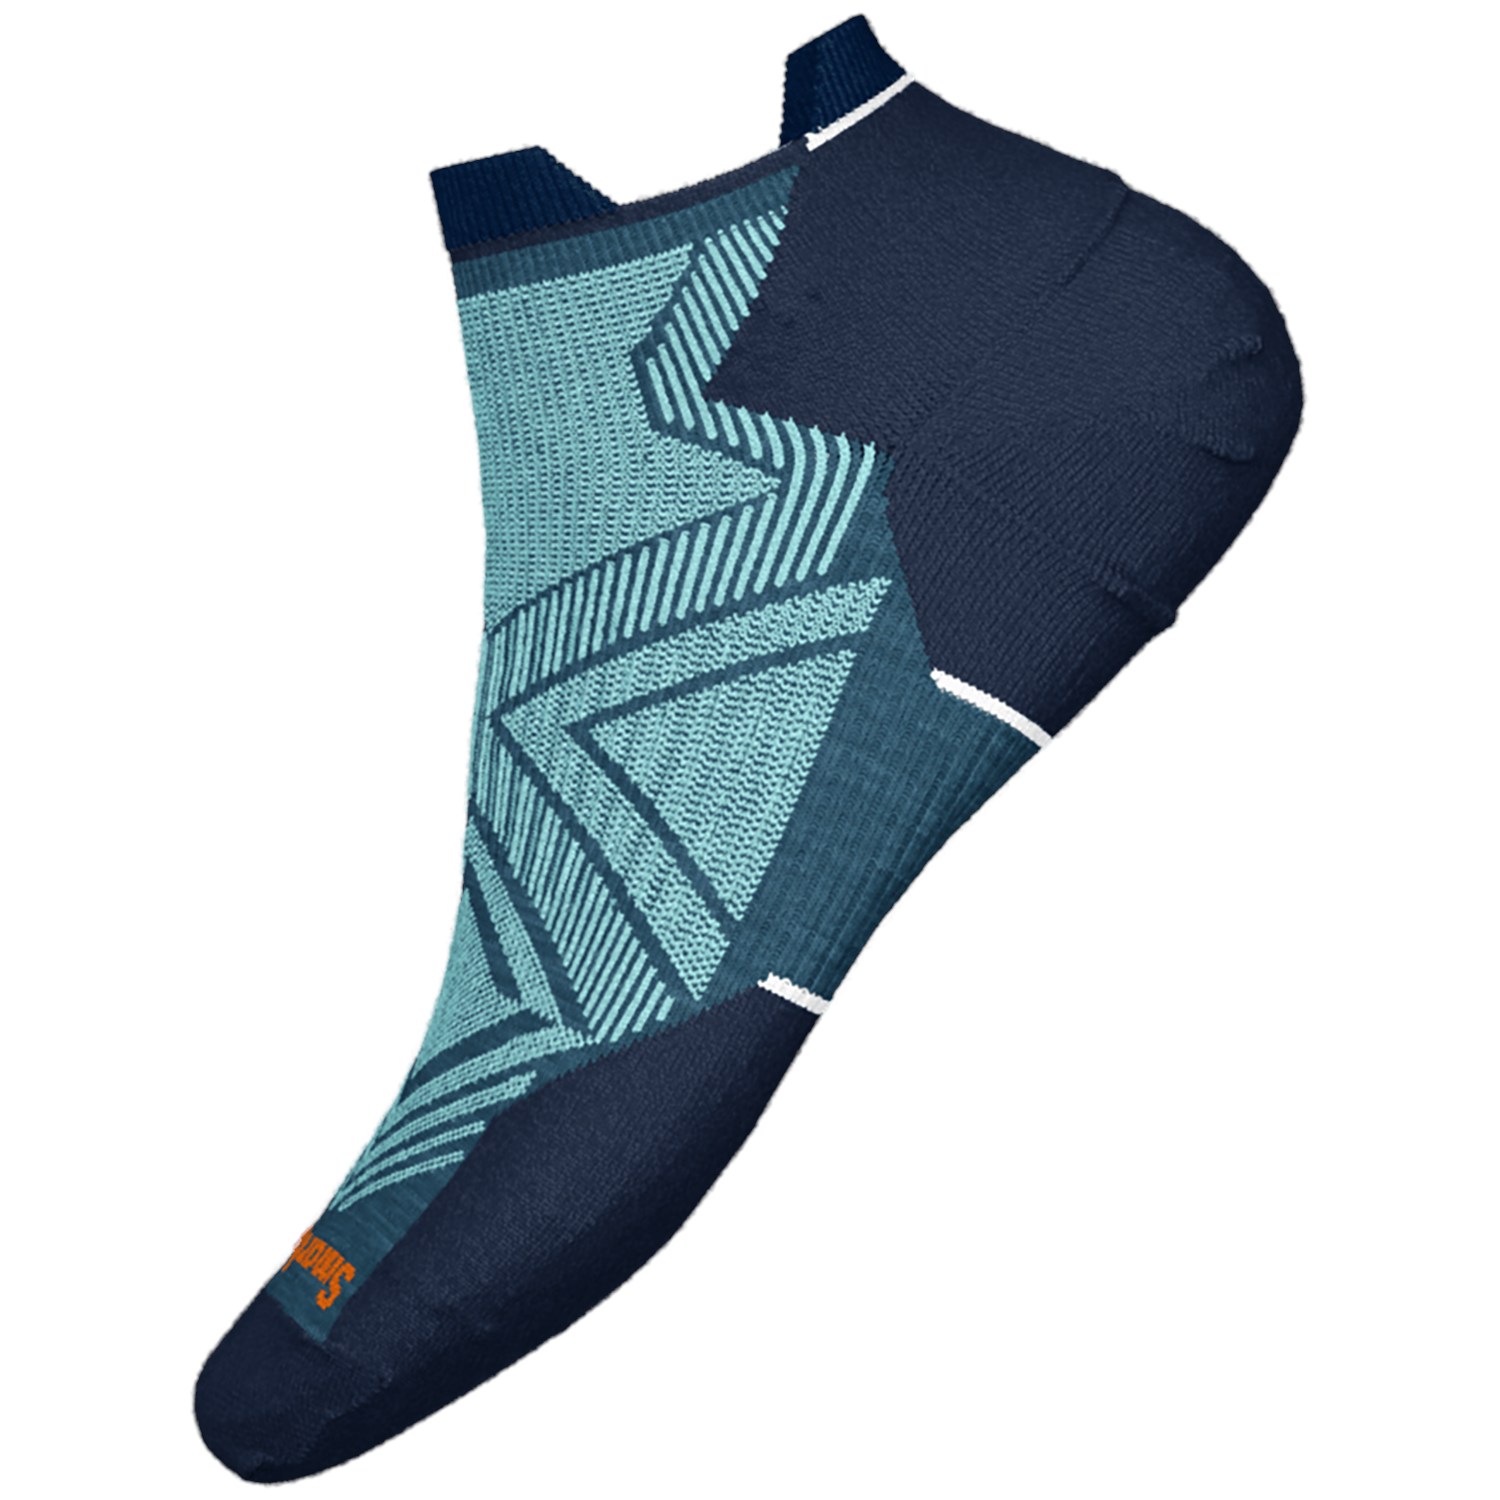 Носки Smartwool Run Targeted Cushion Low Ankle, цвет Twilight Blue 1 pairs men ankle socks sports low cut socks performance thick cushion knit quick dry sock outdoor fitness breathable socks